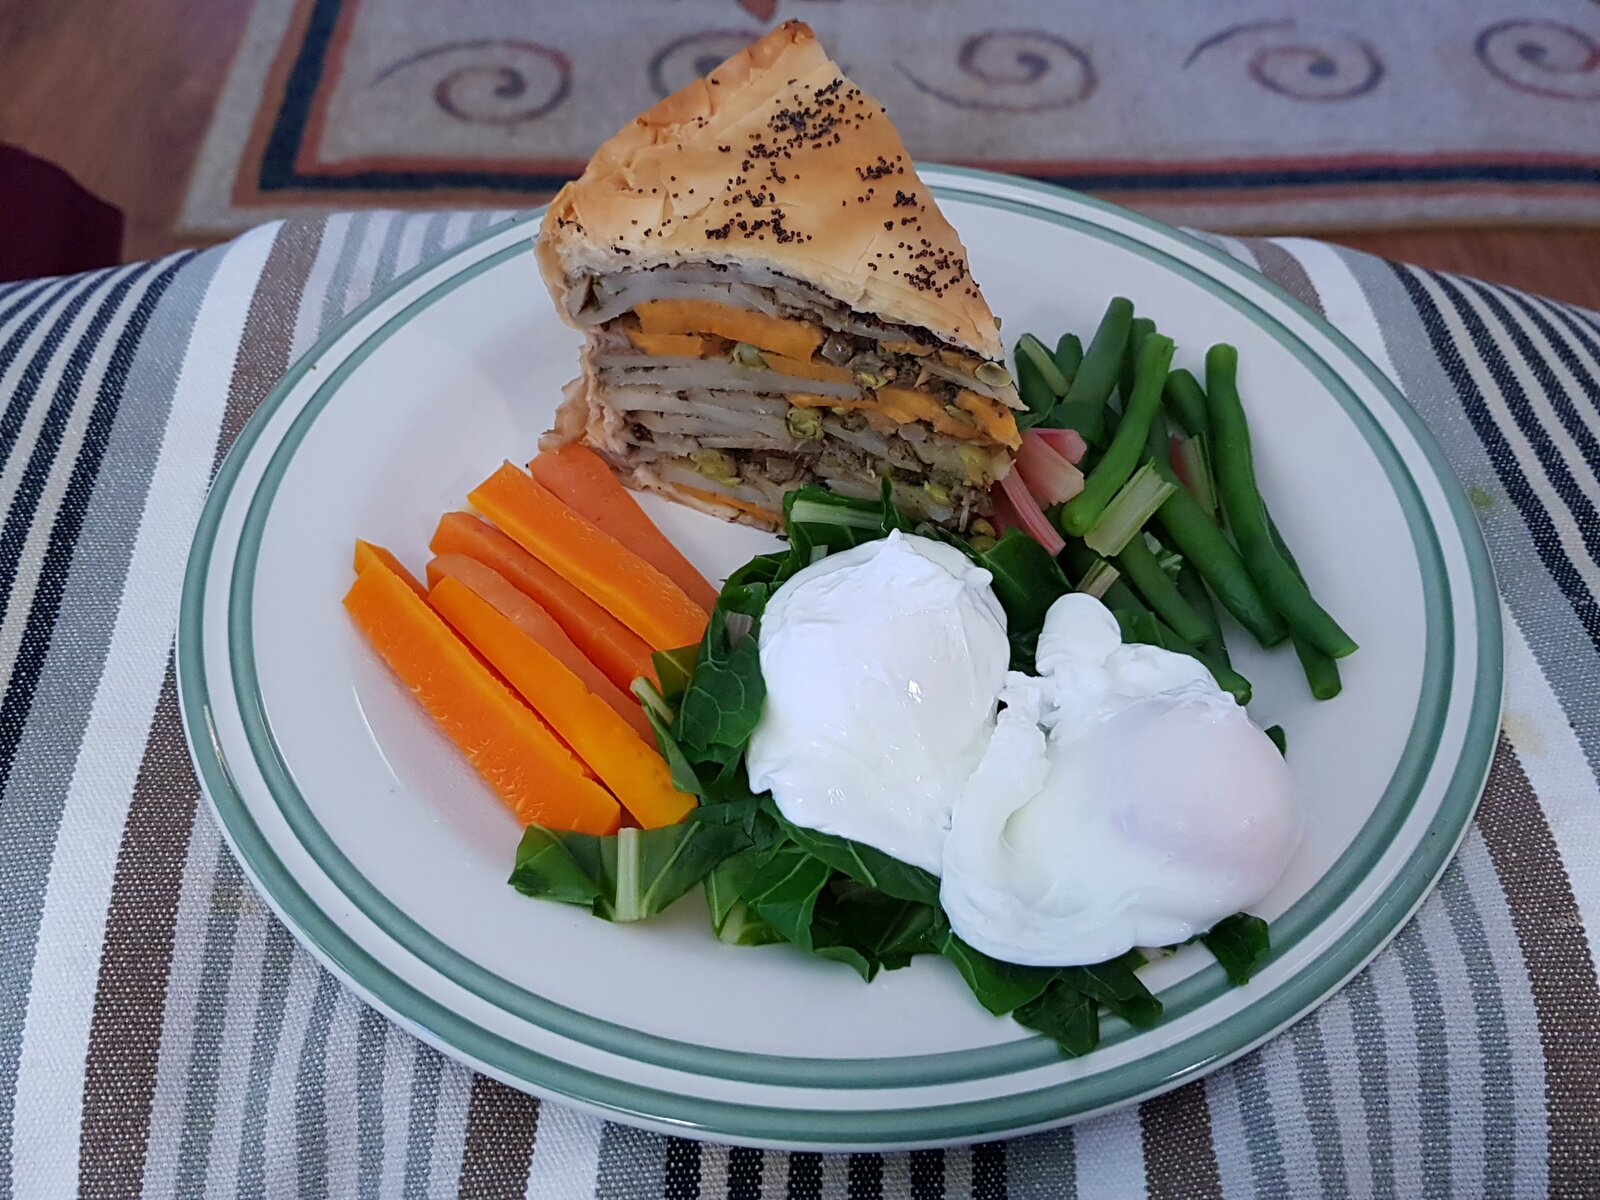 Indian Potato Pie, Poached Eggs, Carrots, Green Beans & Swiss Chard